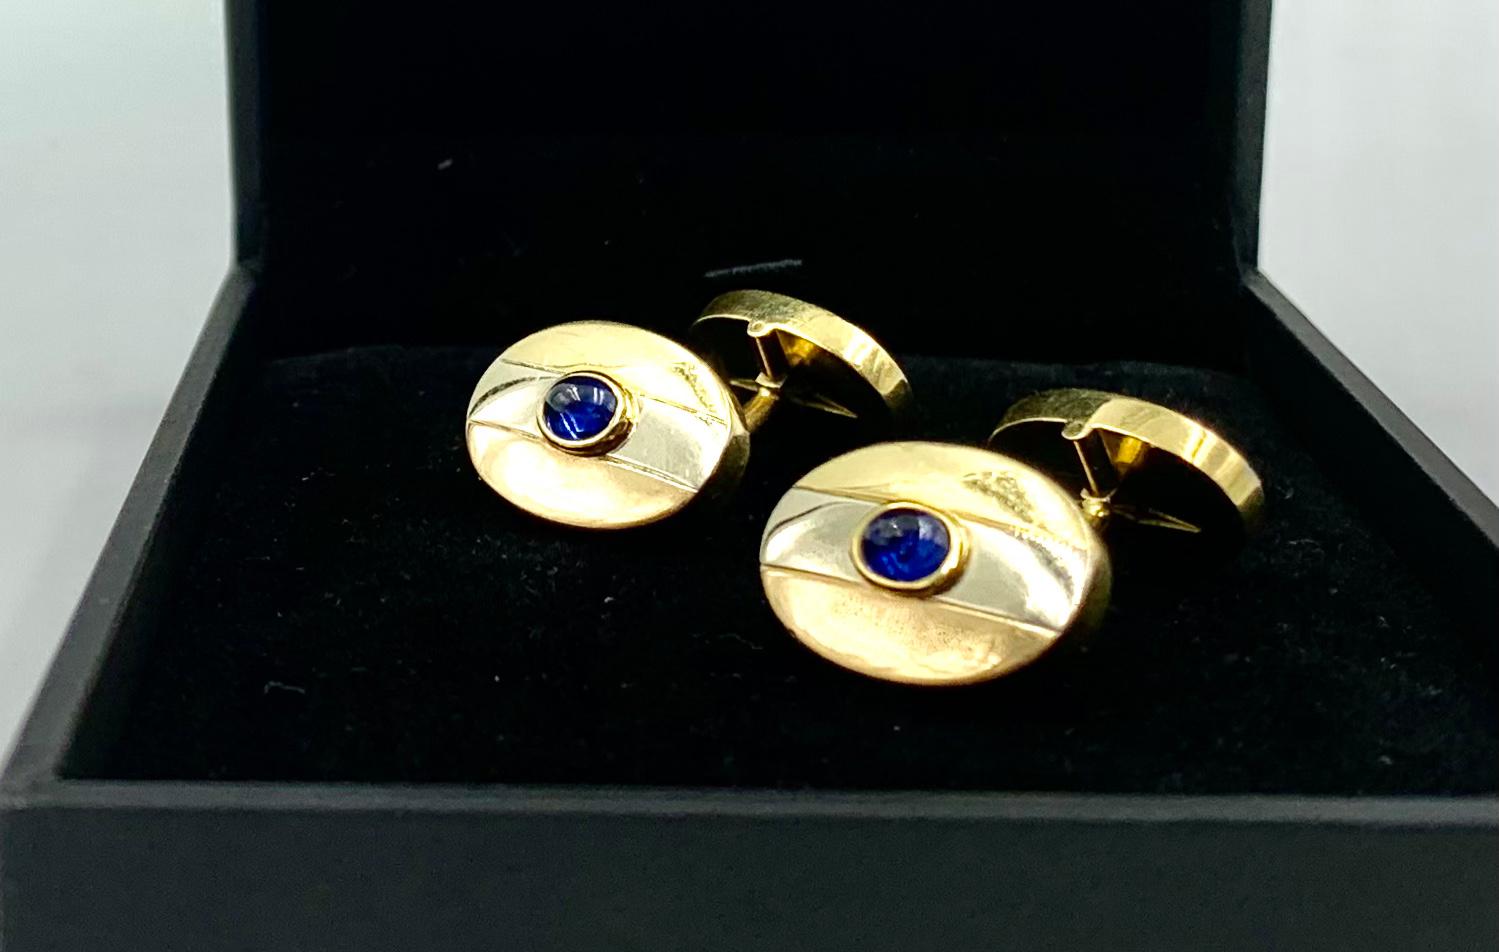 Estate Carlo Weingrill cabochon sapphire and 18k tri-color rose, white and yellow gold cufflinks.
Classic, elegant oval form, substantial size and weight, the backs also tri-color gold and hinged to open in either direction, excellent craftsmanship,